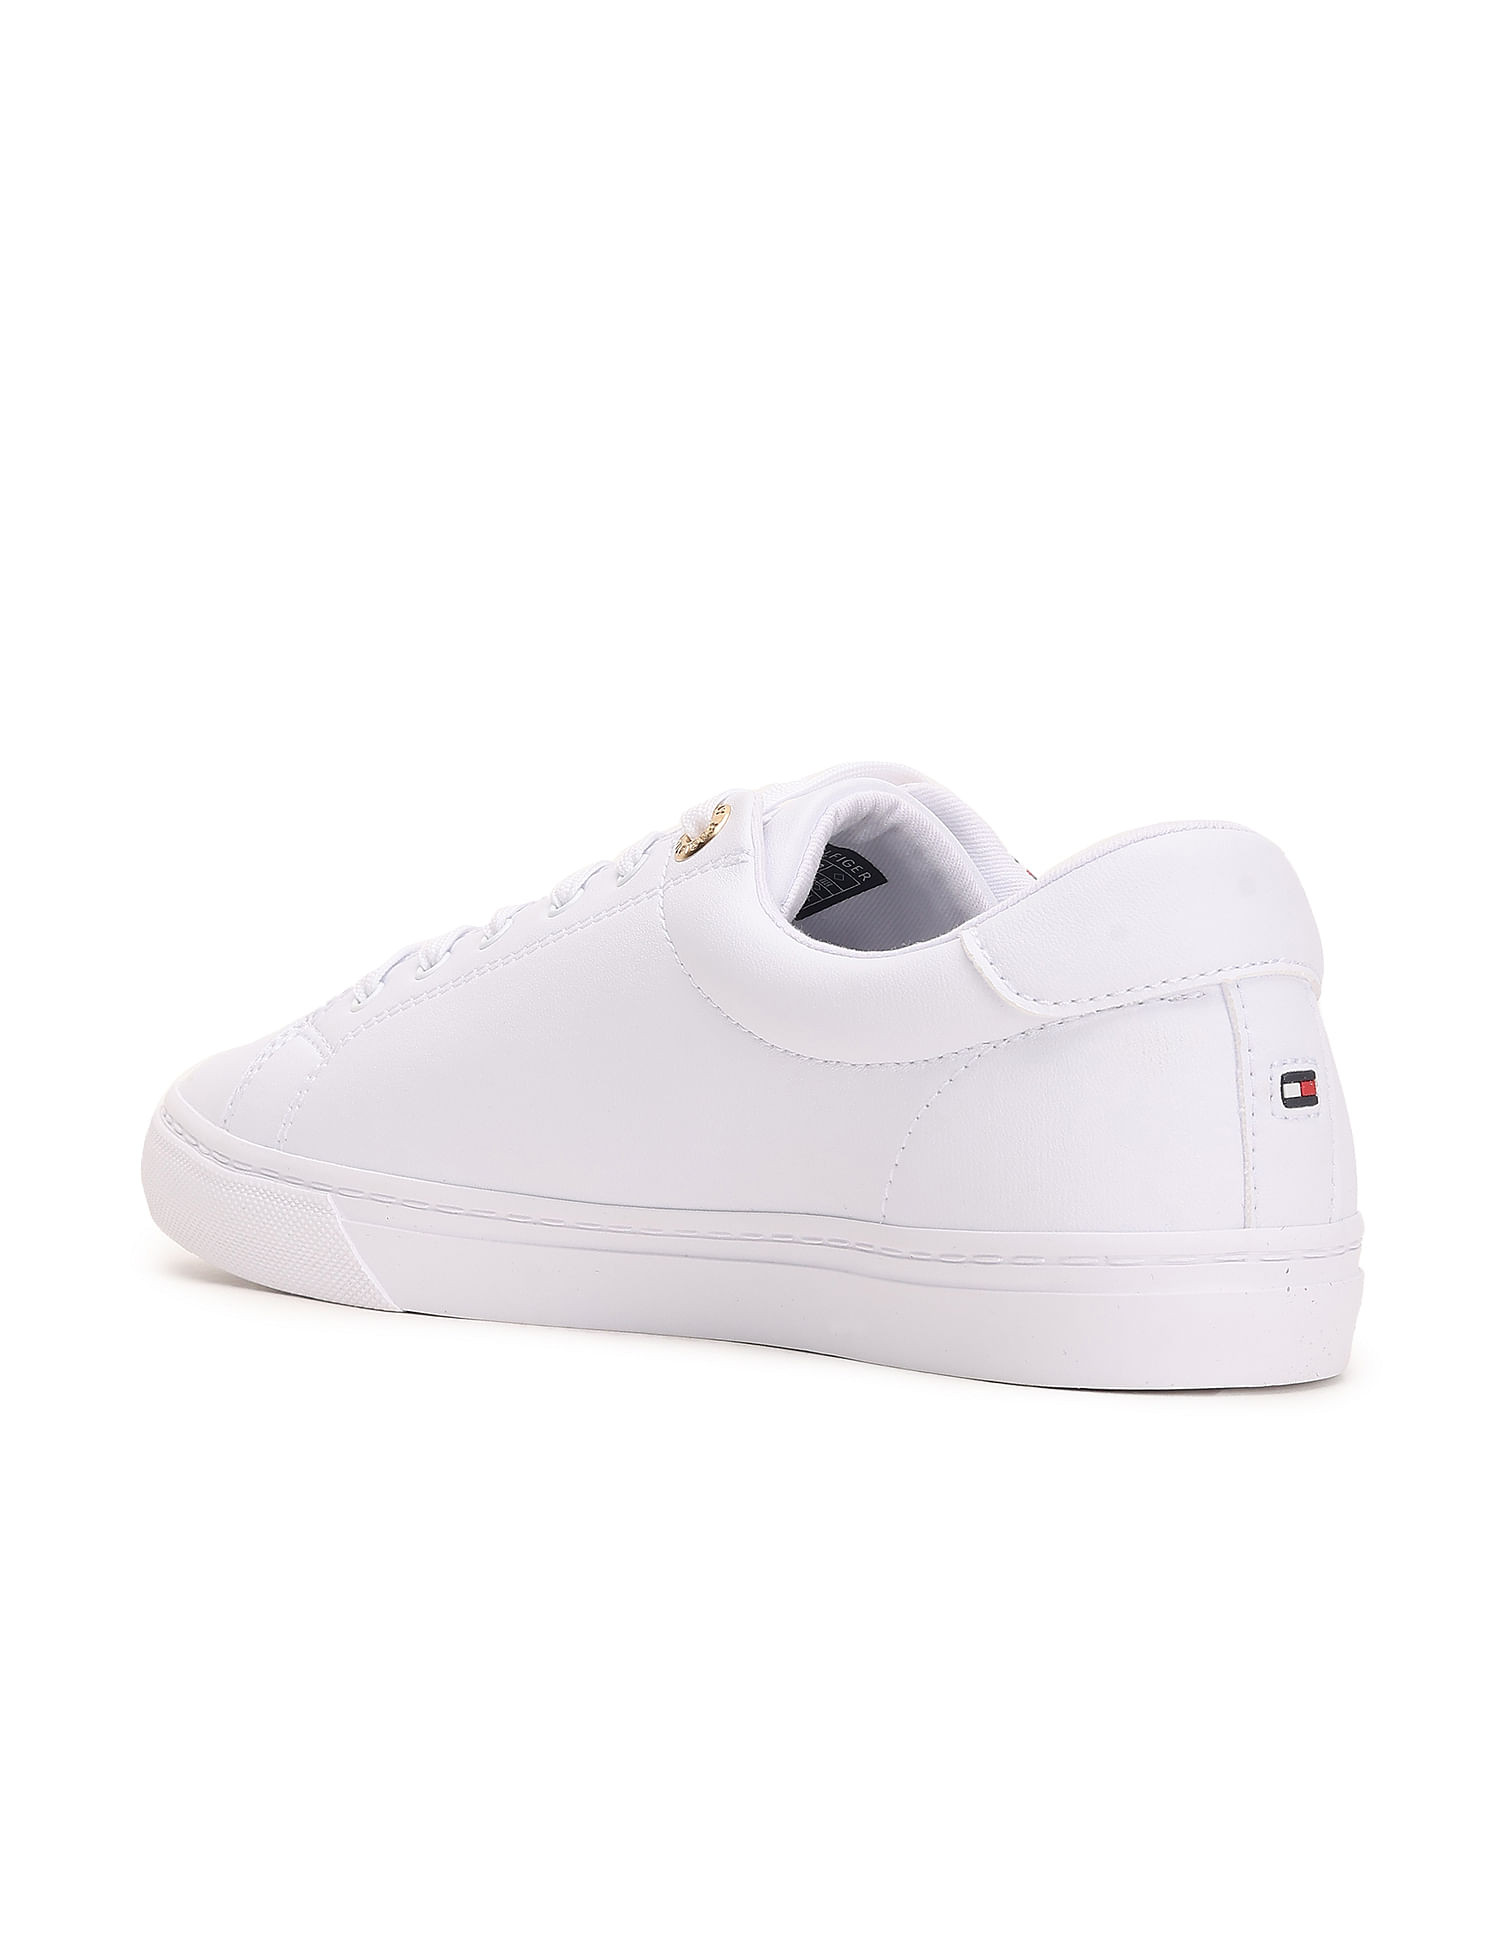 Buy Tommy Hilfiger Global Stripe Lace-Up Trainers in White 2024 Online